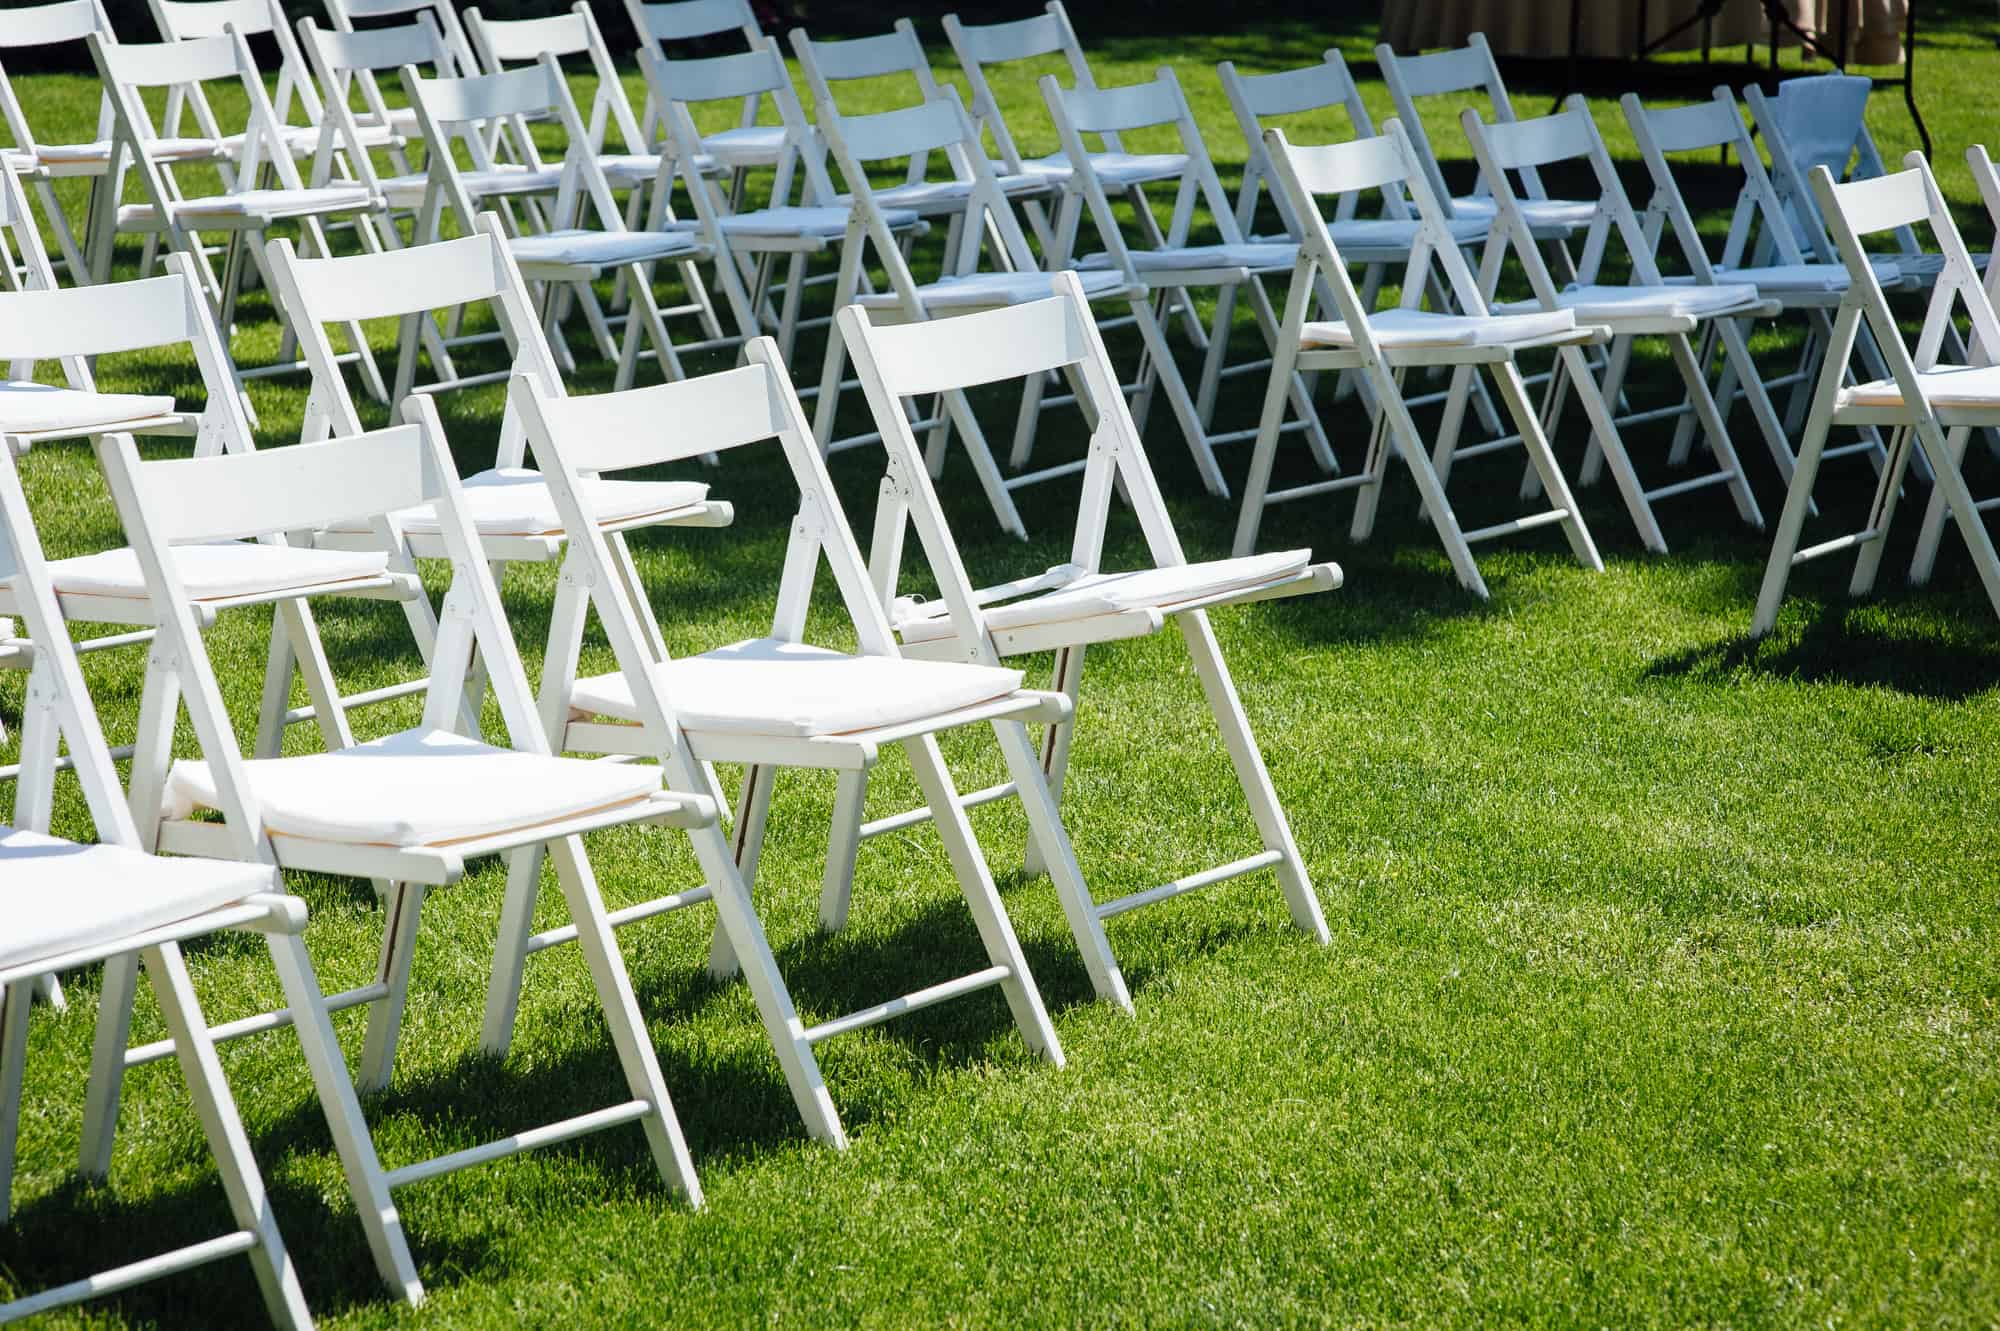 How to Keep Lawn Furniture from Sinking into Grass 